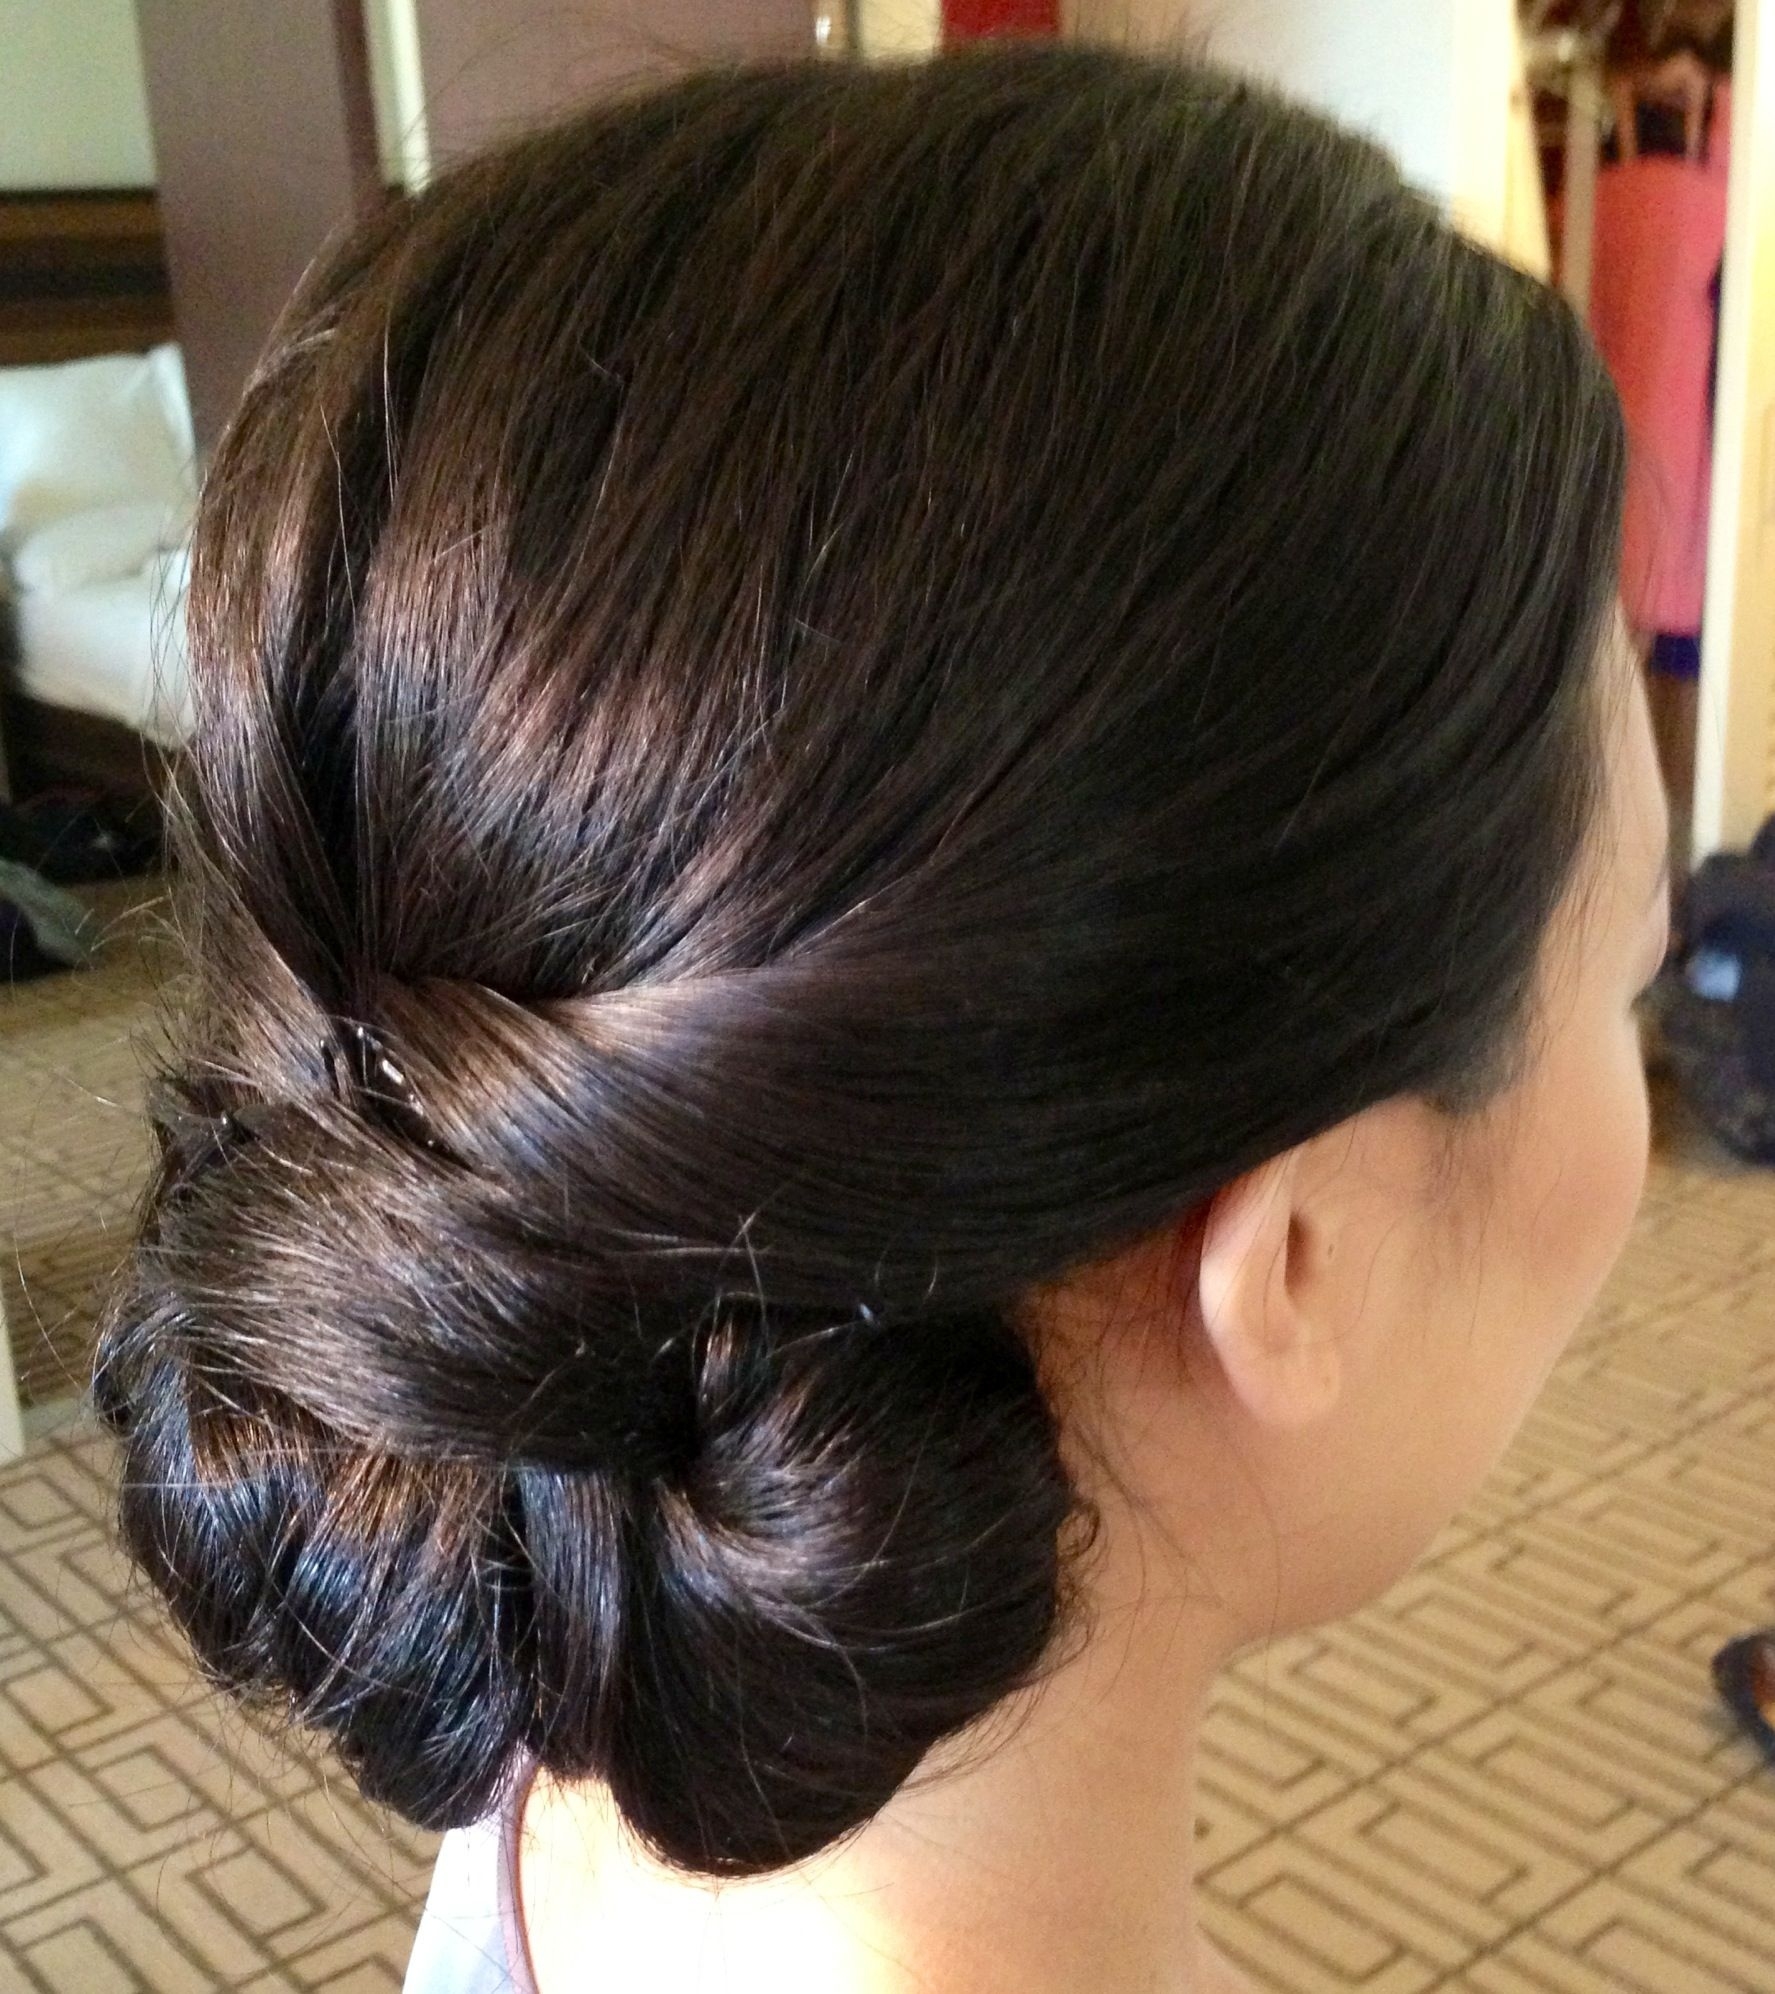 Wedding Updo, Wedding Hair, Updo, Classic Updo, Chignon, Asian with Asian Wedding Updo Hairstyles